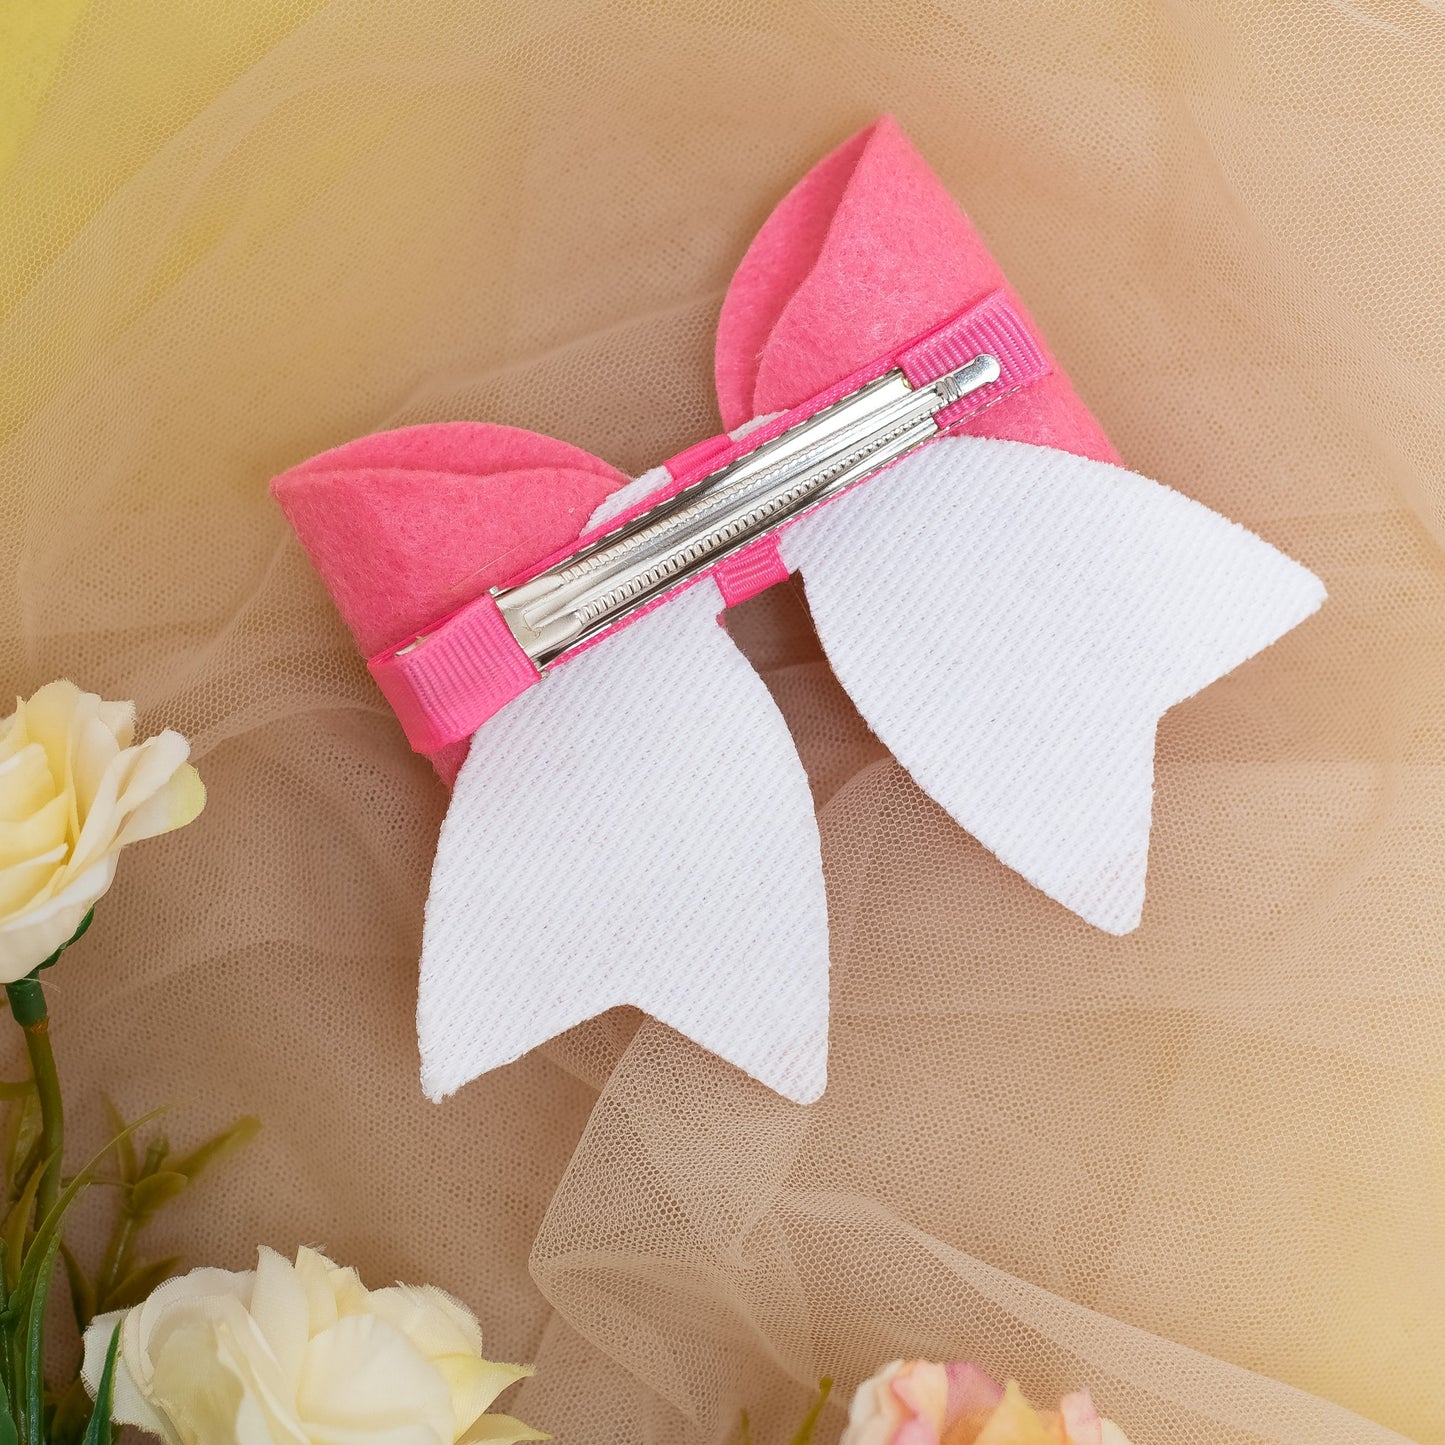 Large, Fancy Party Bow with Shimmer on Alligator Clip- Peach